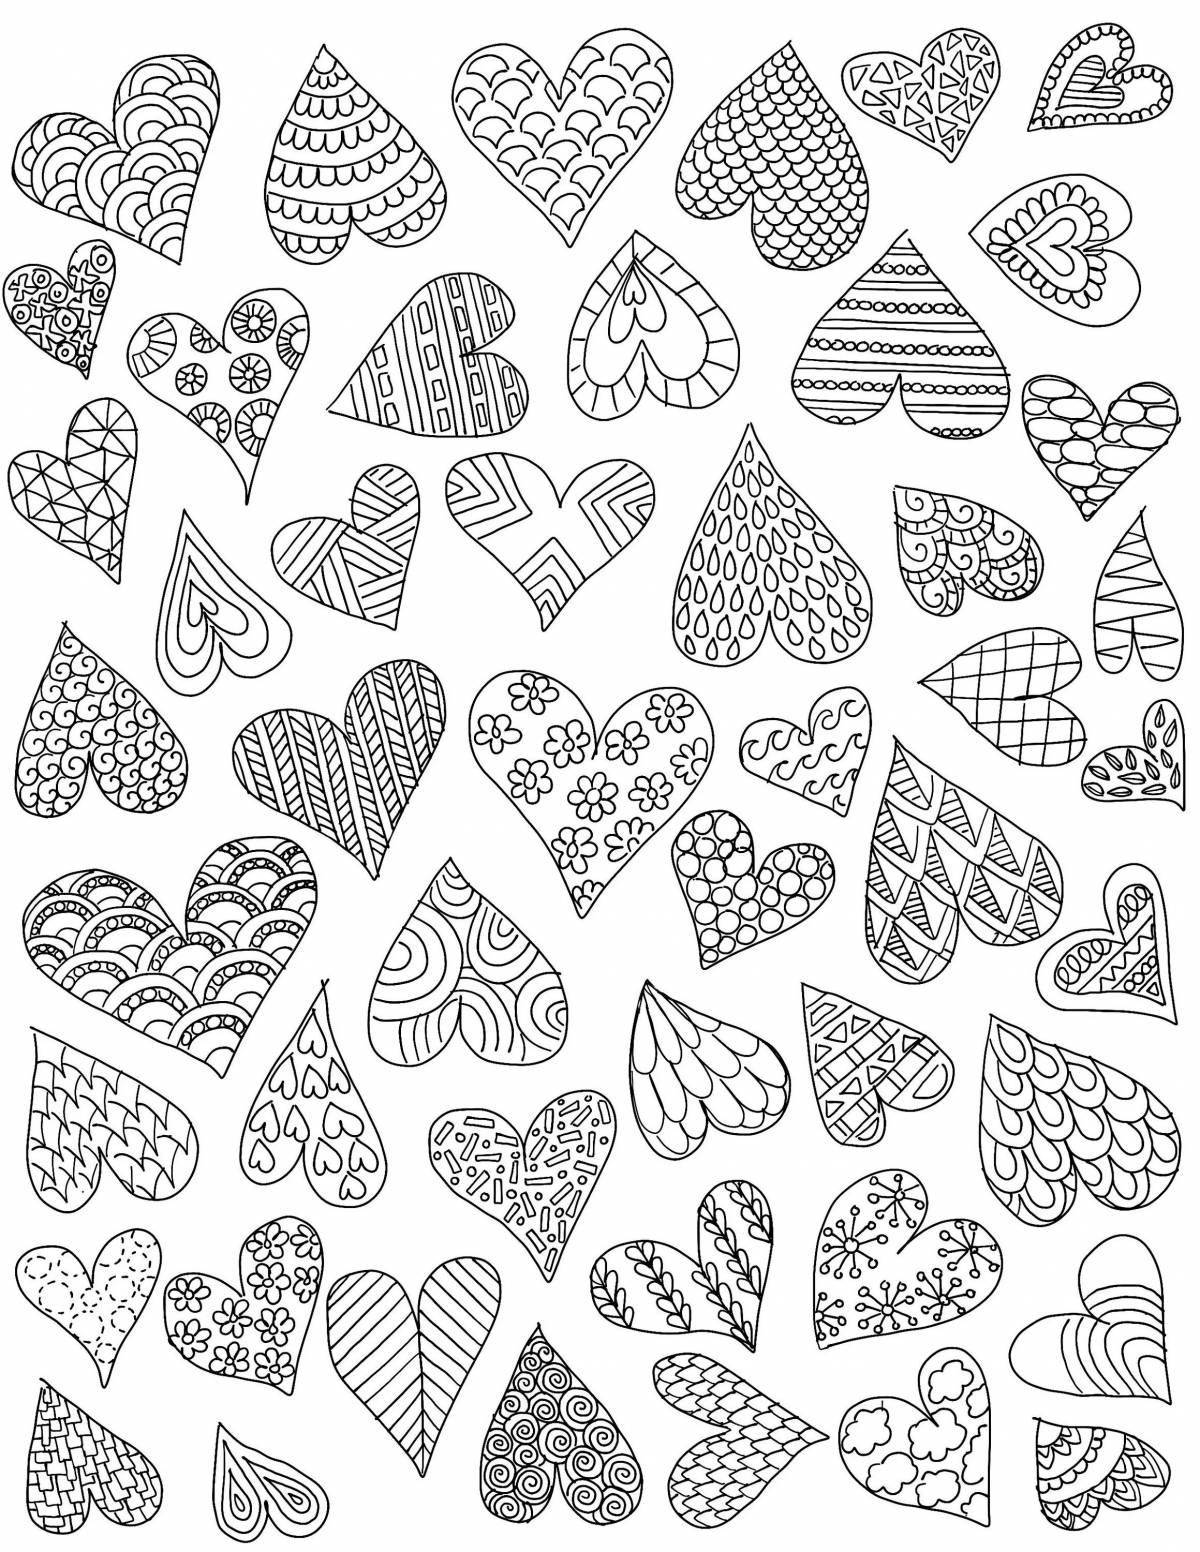 Cute little hearts coloring page